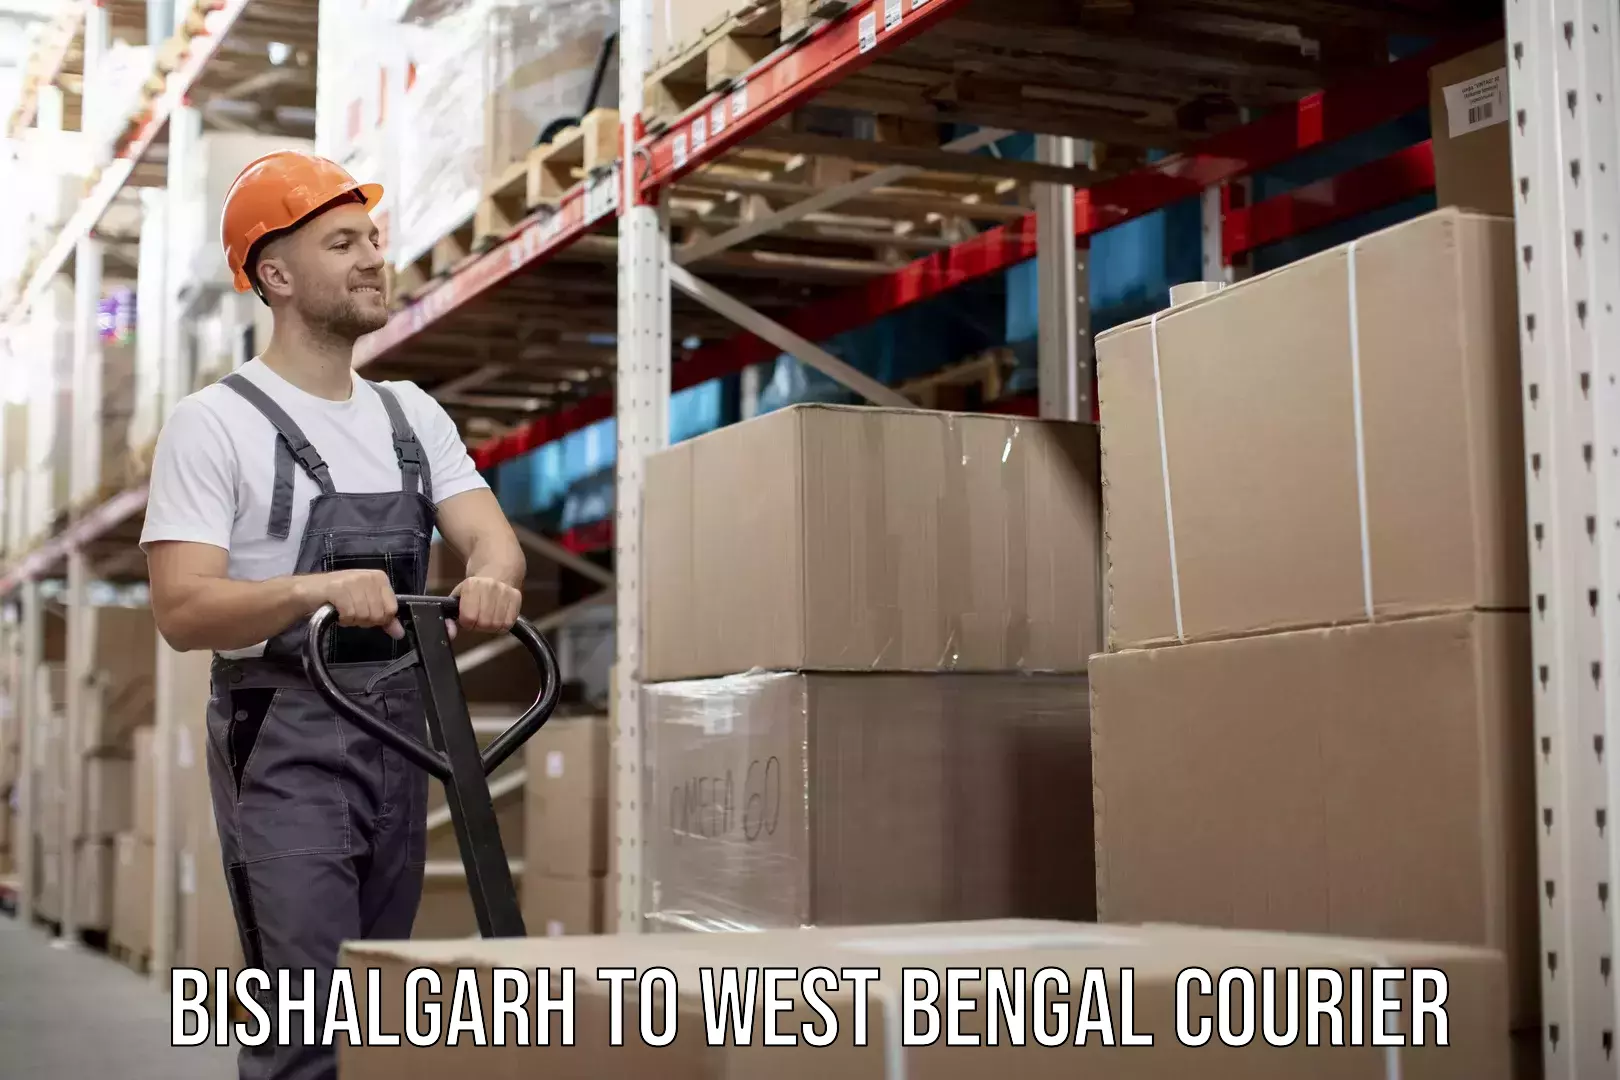 Local delivery service Bishalgarh to West Bengal